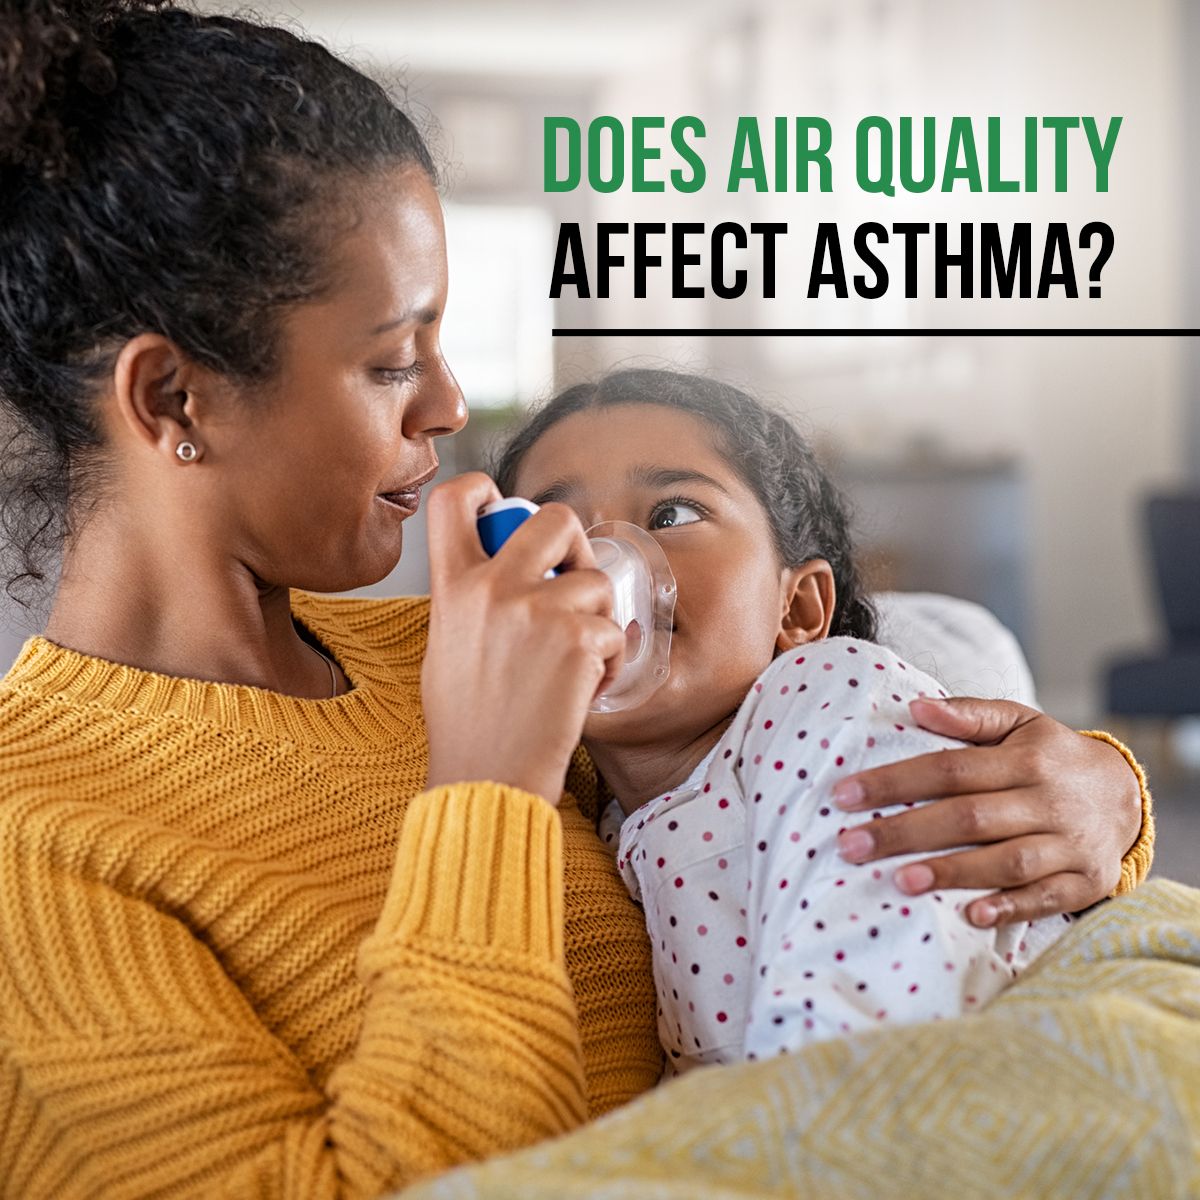 Does Air Quality Affect Asthma?